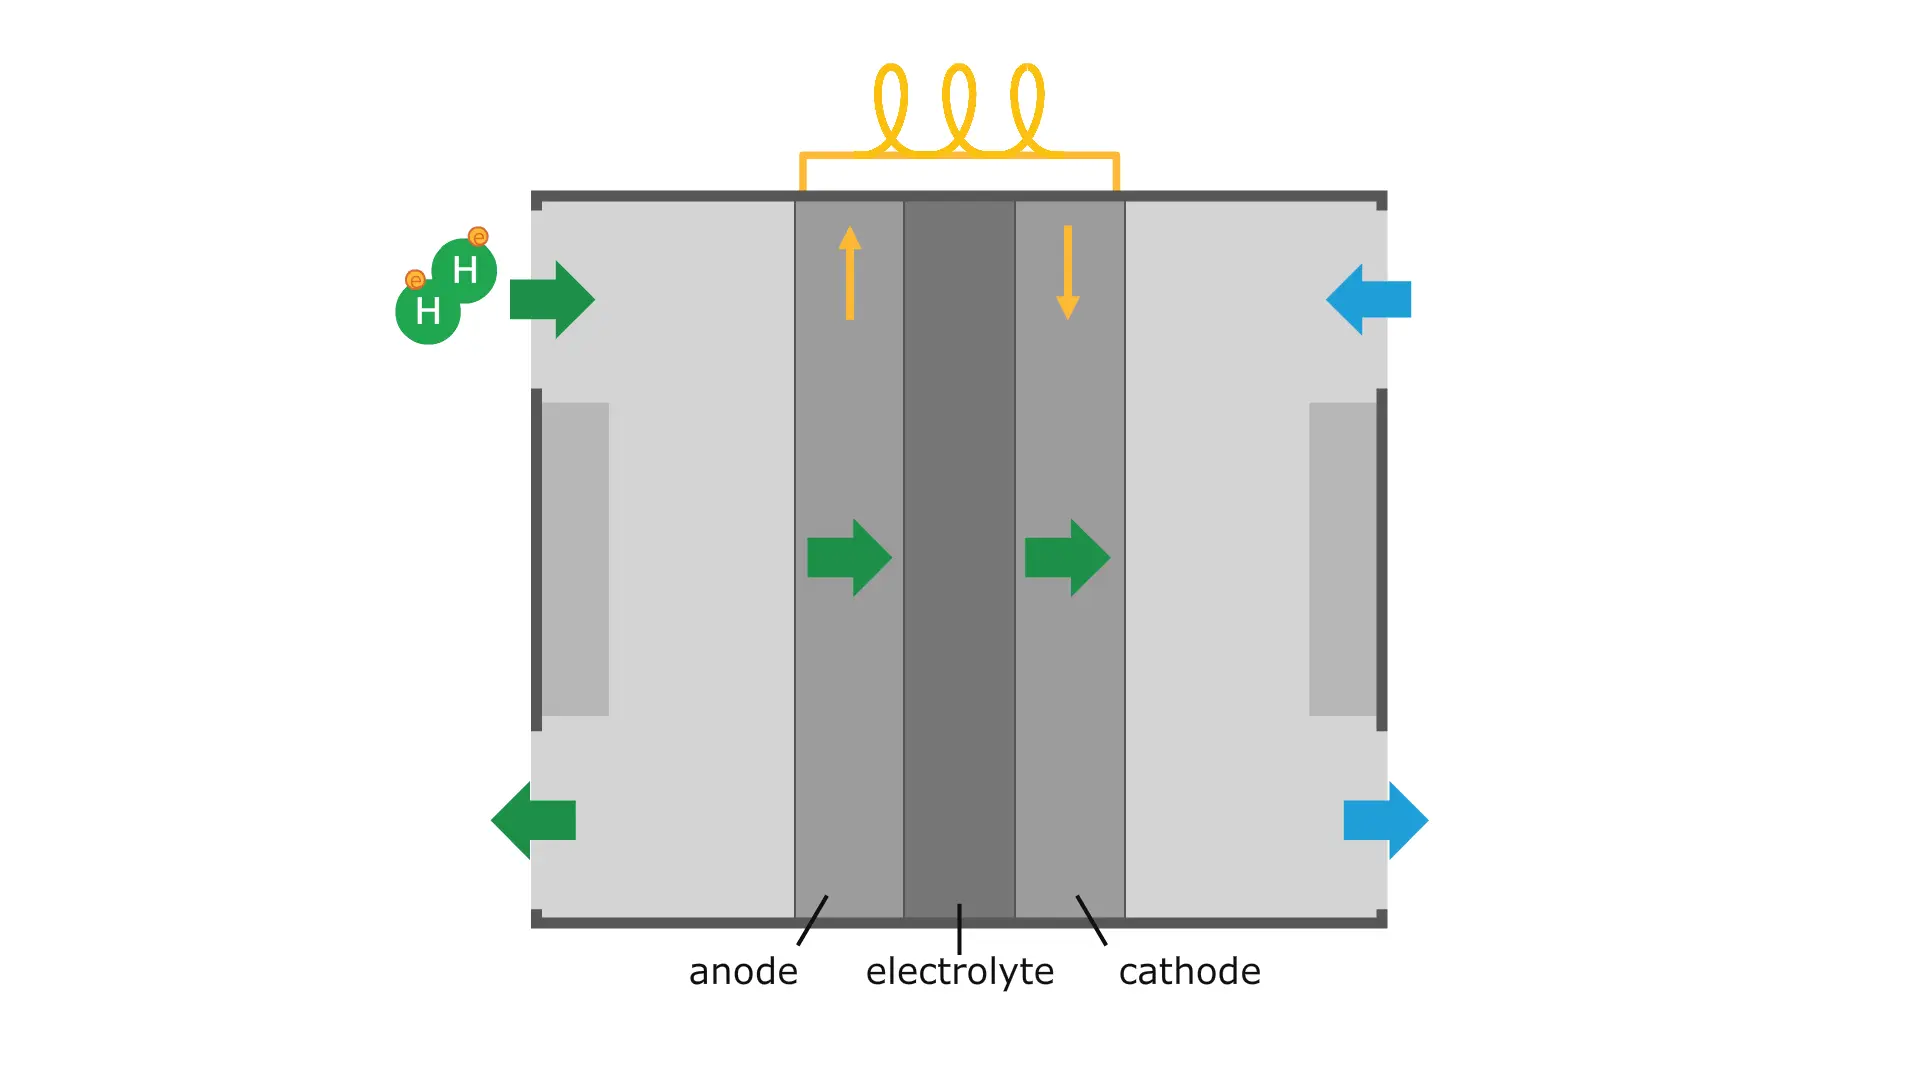 How a hydrogen fuel cell works: 1) hydrogen gas (H2) in 2) electrons separated from hydrogen protons 3) electrons generate an electric current 4 ) protons pass through electrolyte 5) oxygen gas (O2) in the air flows in 6) protons rejoin electrons, bond with oxygen to make water (H2O) 7) Excess H2 gas recirculated 8) water at tailpipe 